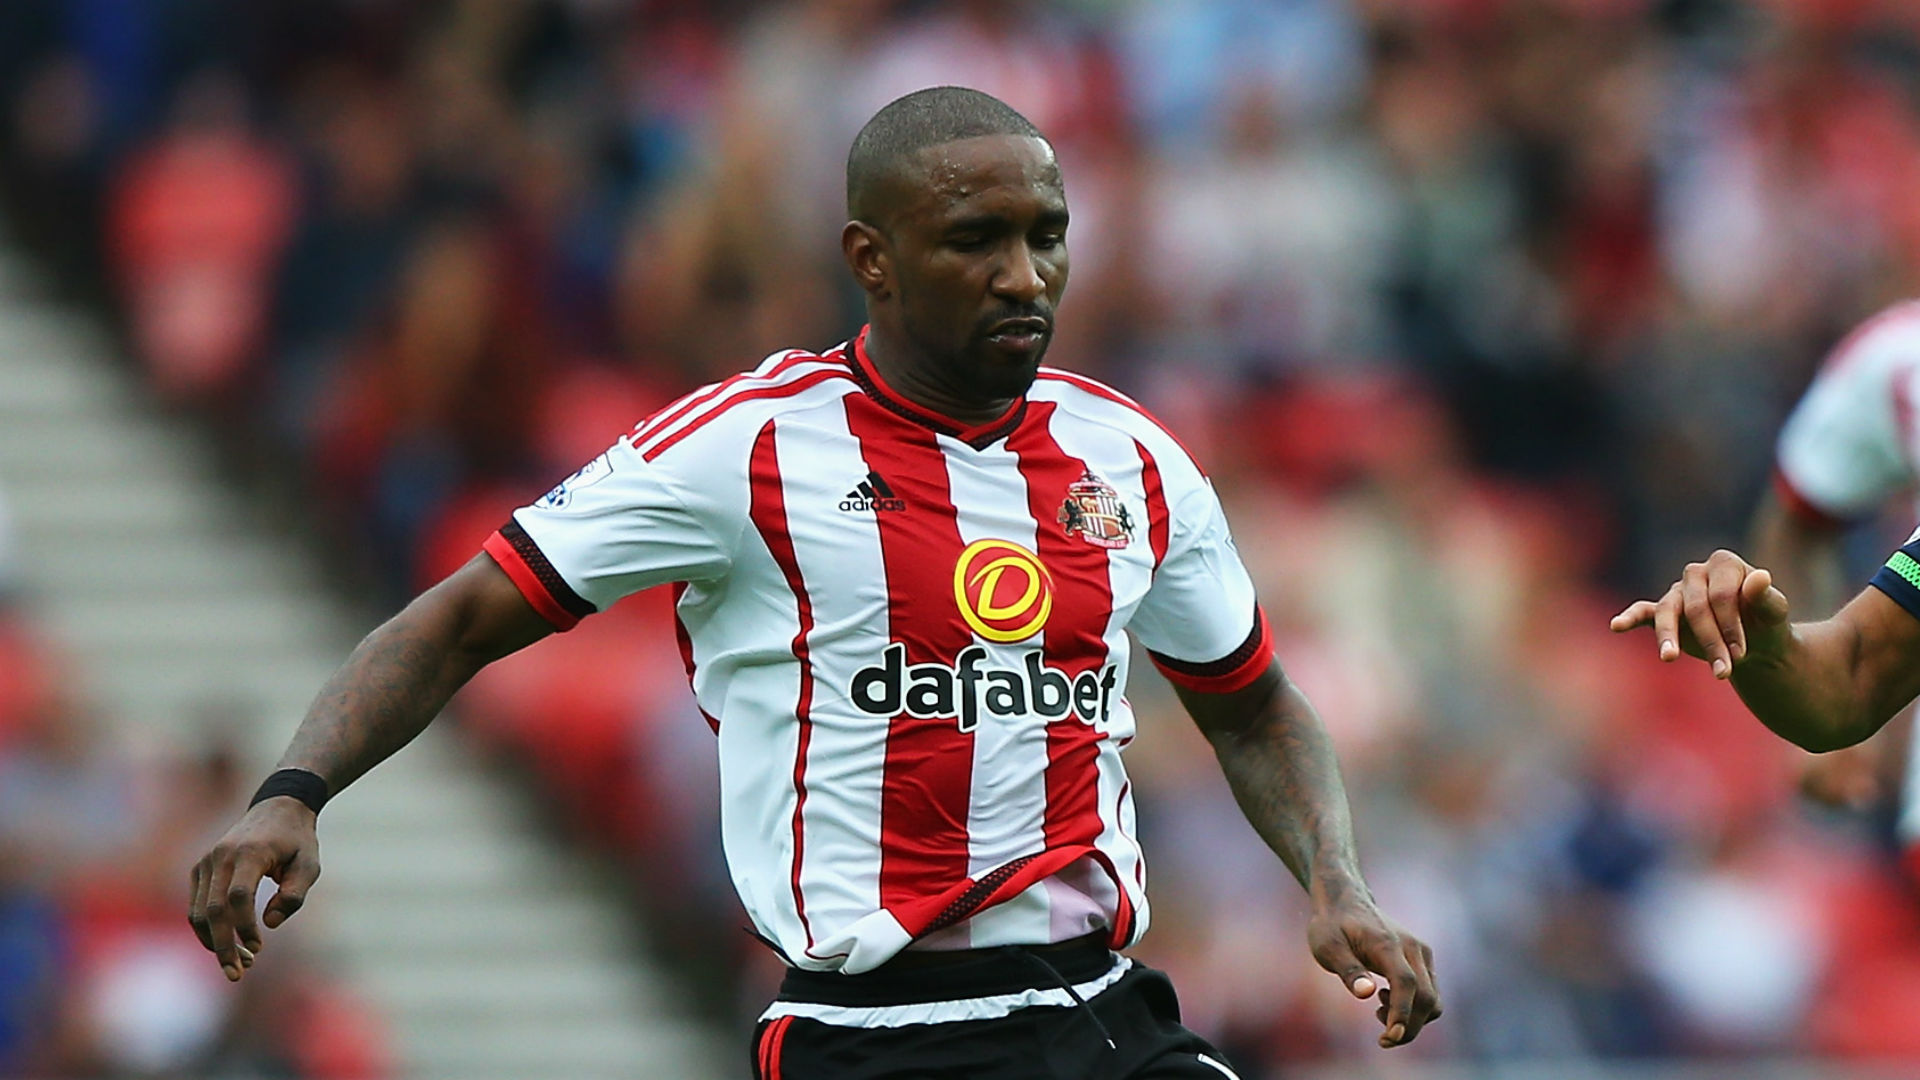 Sunderland Hold Swansea City In The Premier League - Player , HD Wallpaper & Backgrounds